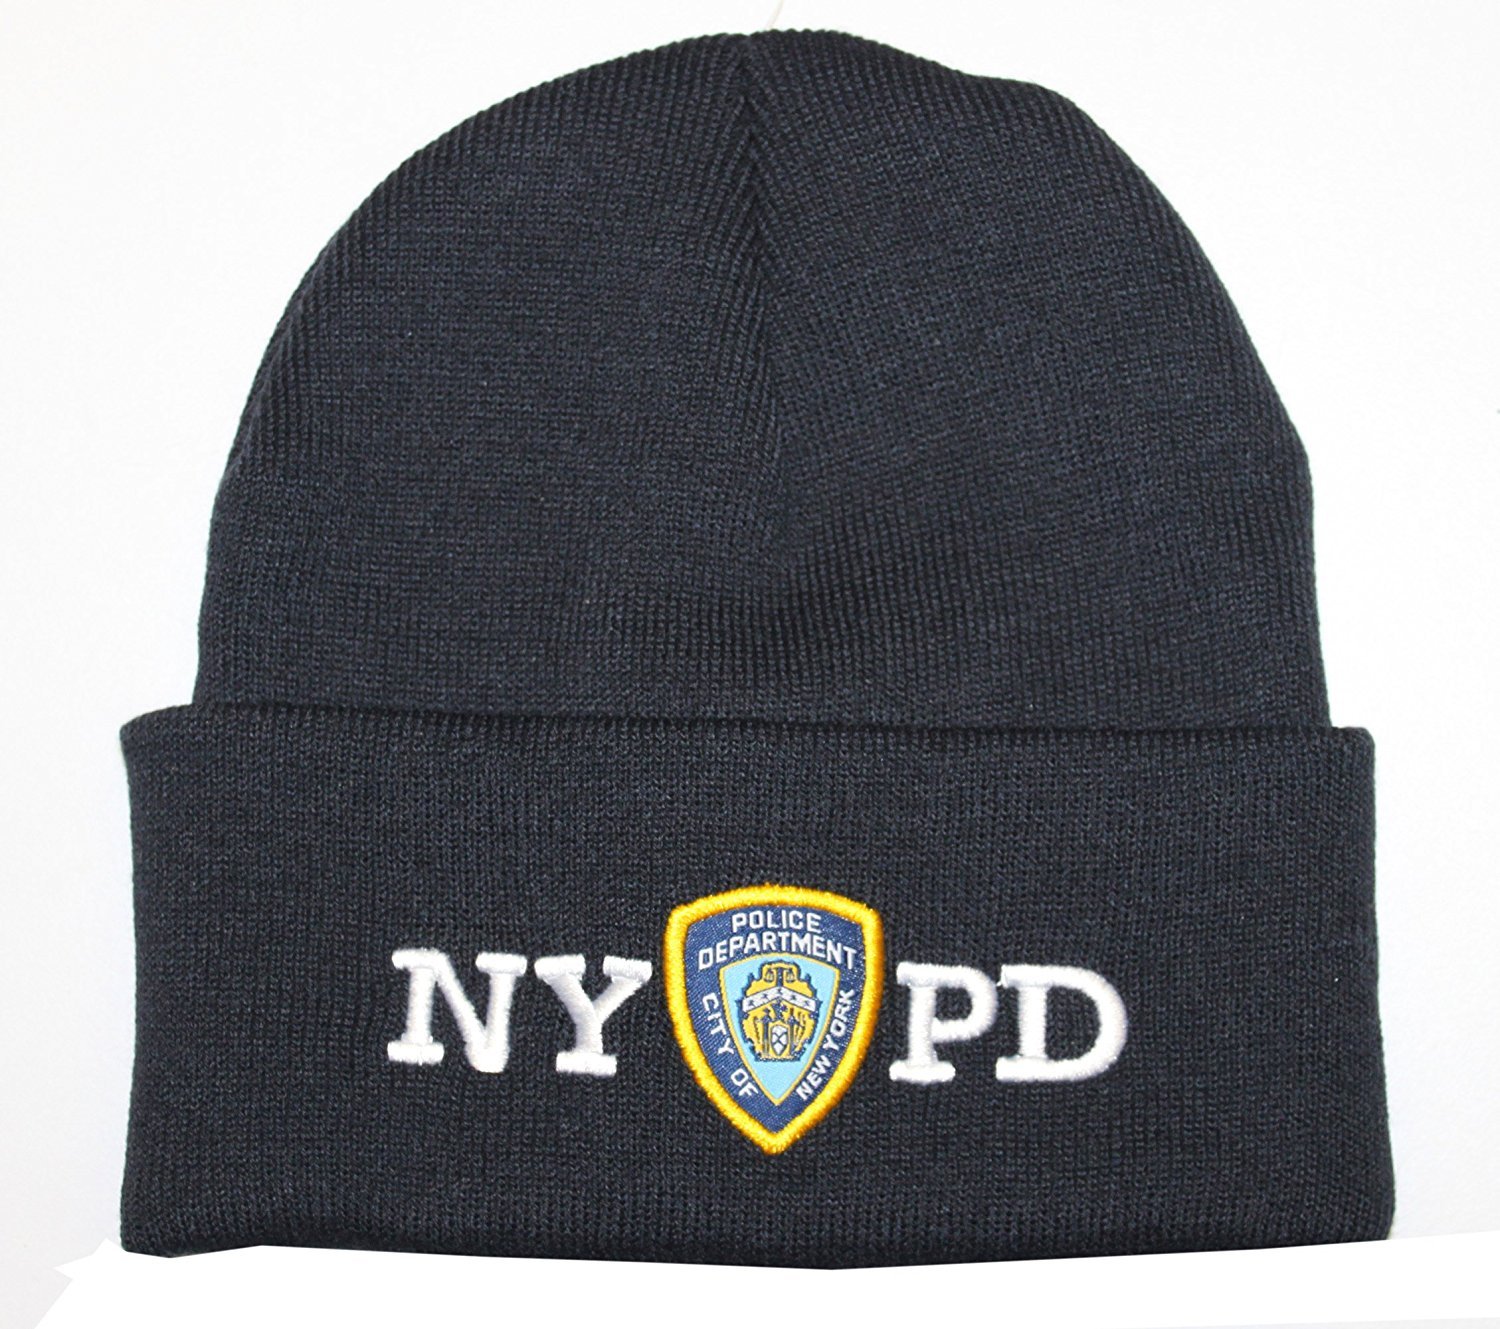 NYPD Winter Hat Police Badge New York Police Department Navy & White One Size